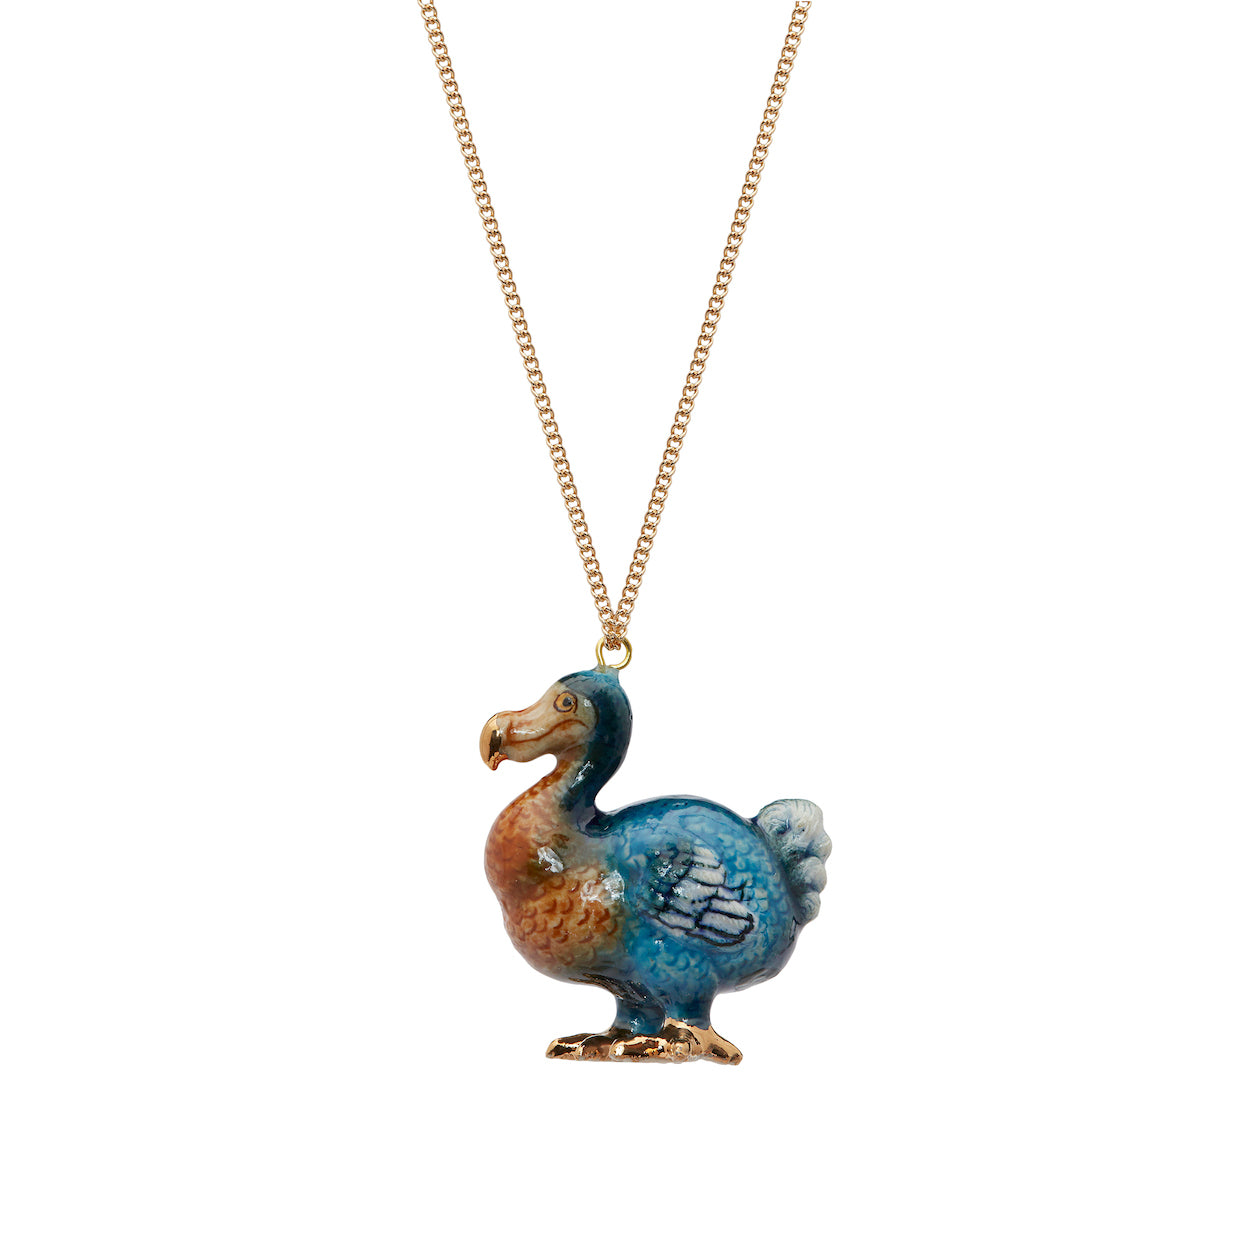 Teal and Gold Dodo Necklace